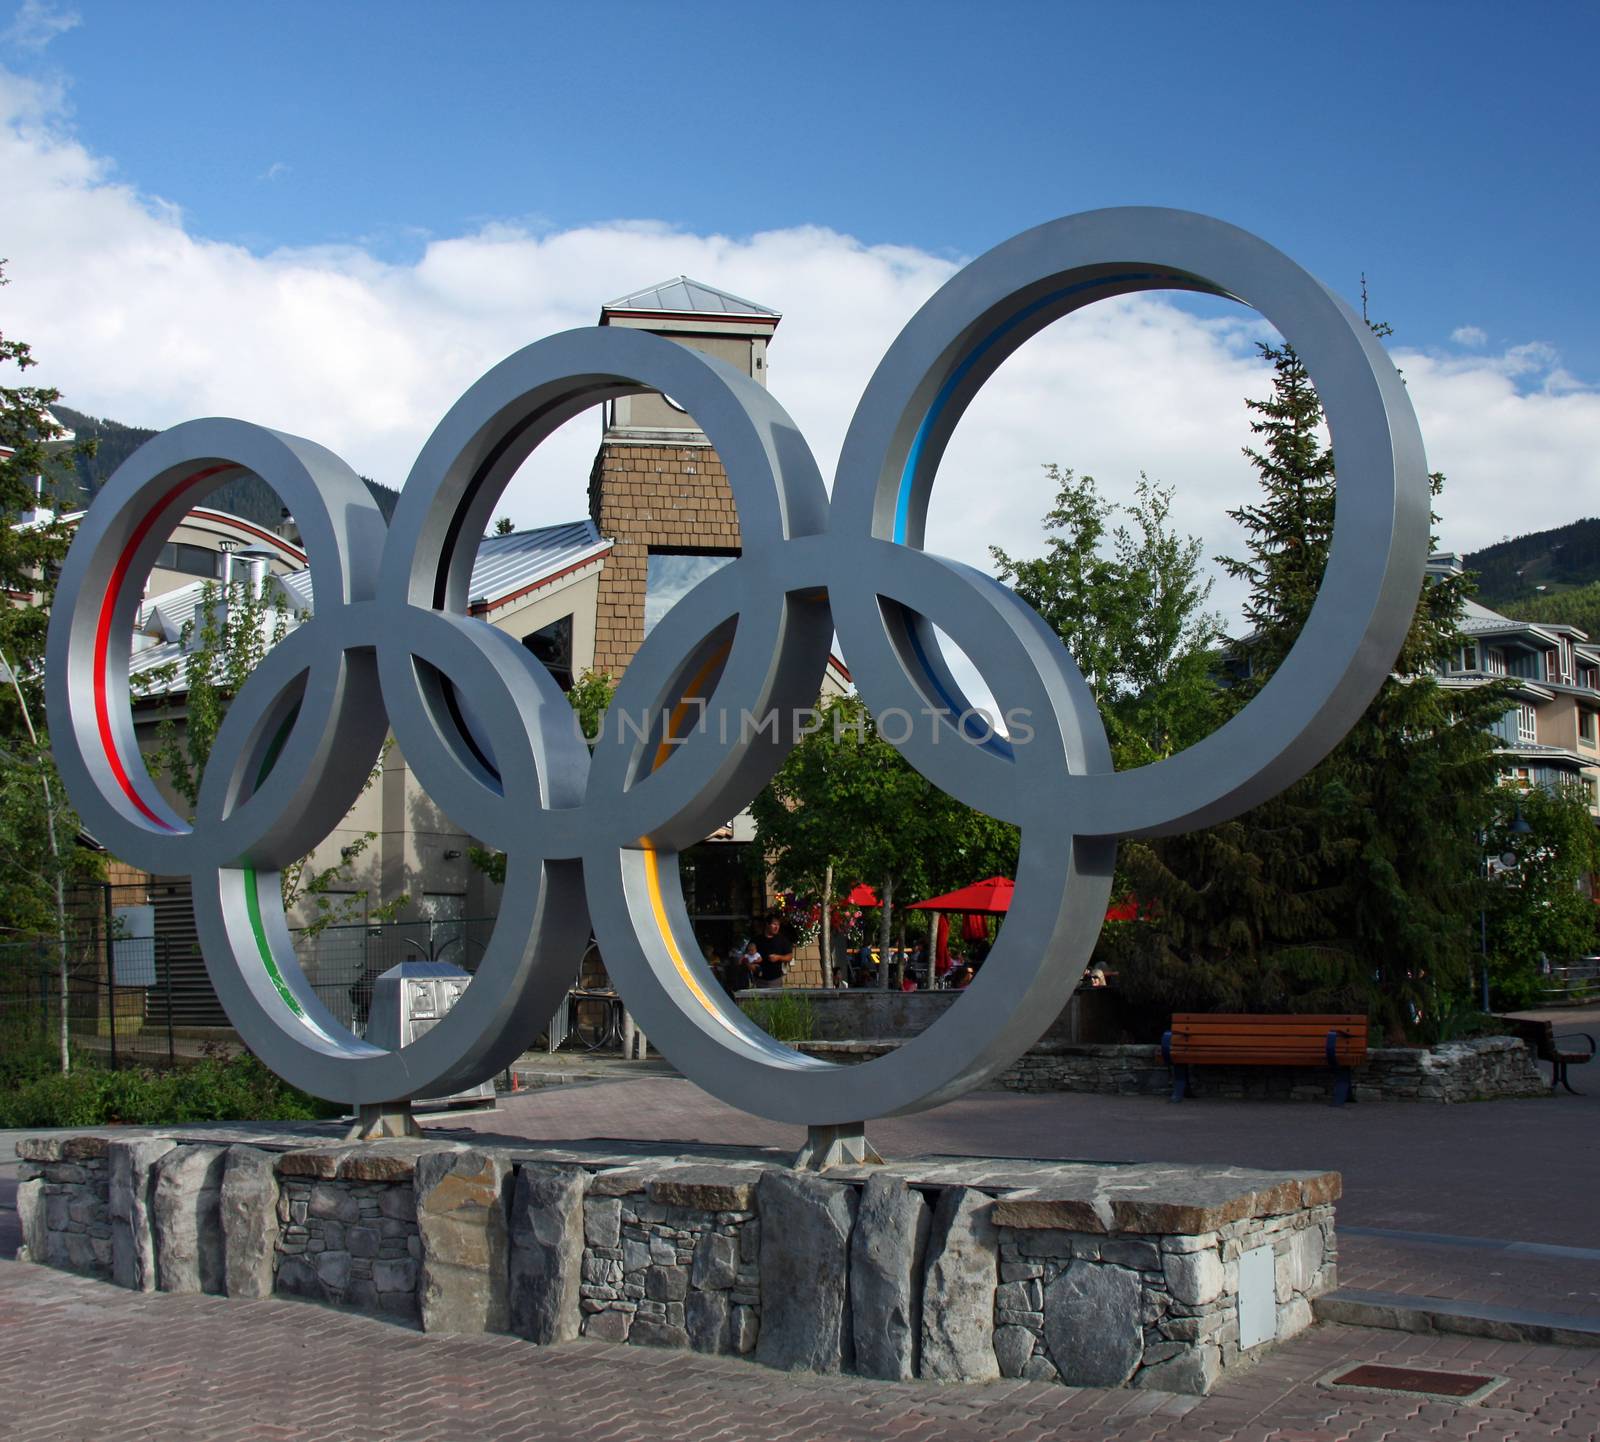 WHISTLER VILLAGE - JUL 12: Olympic rings in Whistler Village, site of the 2010 Winter Olympics and Paralymics. Taken July 12, 2011 in Whistler Village, British Columbia, Canada.